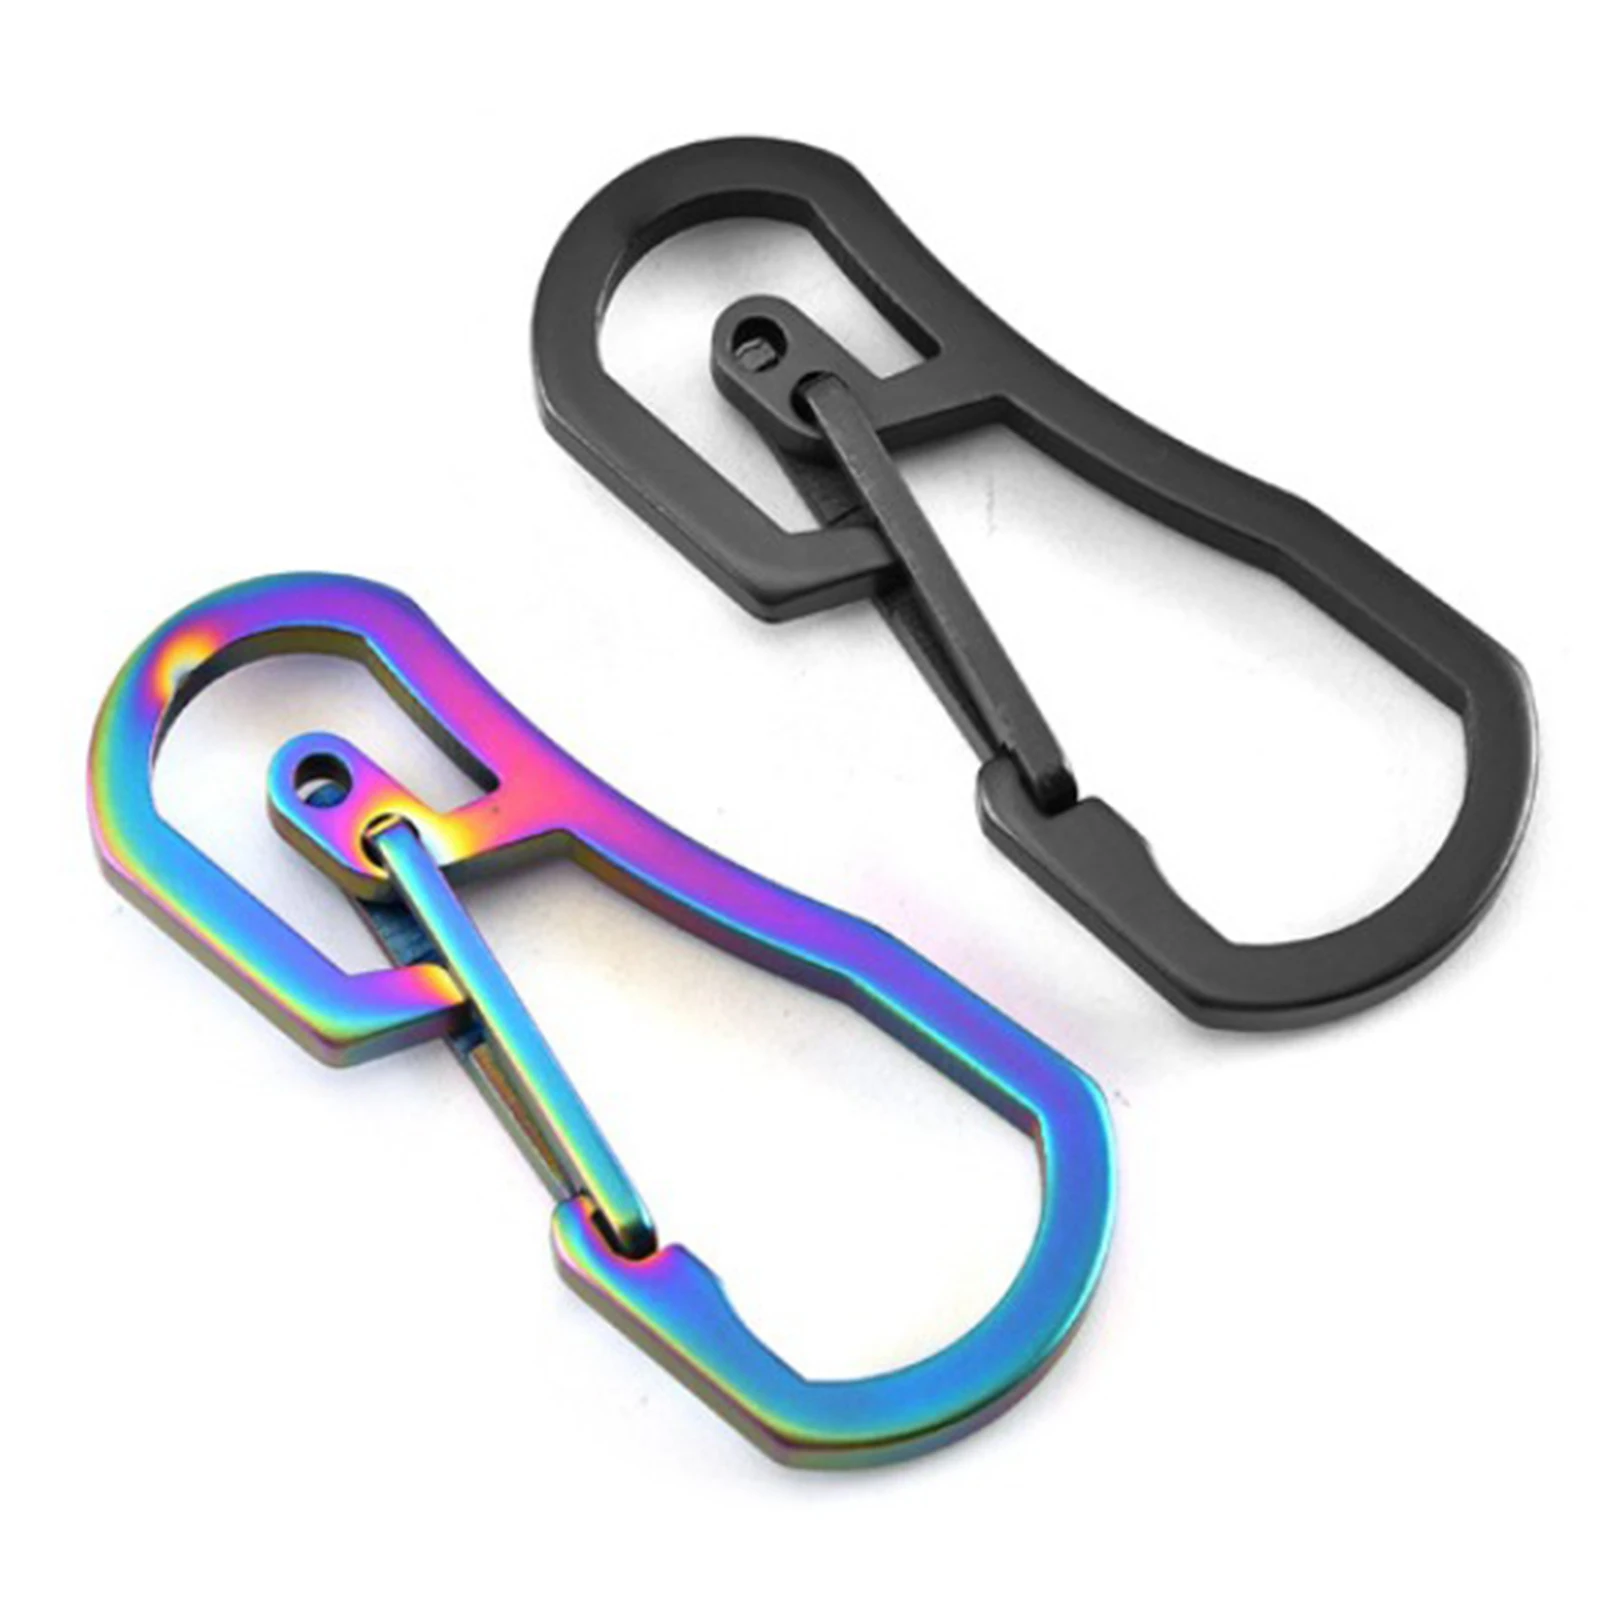 Buckle Keychain EDC Stainless Steel Carabiner Key Chain Clip Hook Outdoor Hiking 